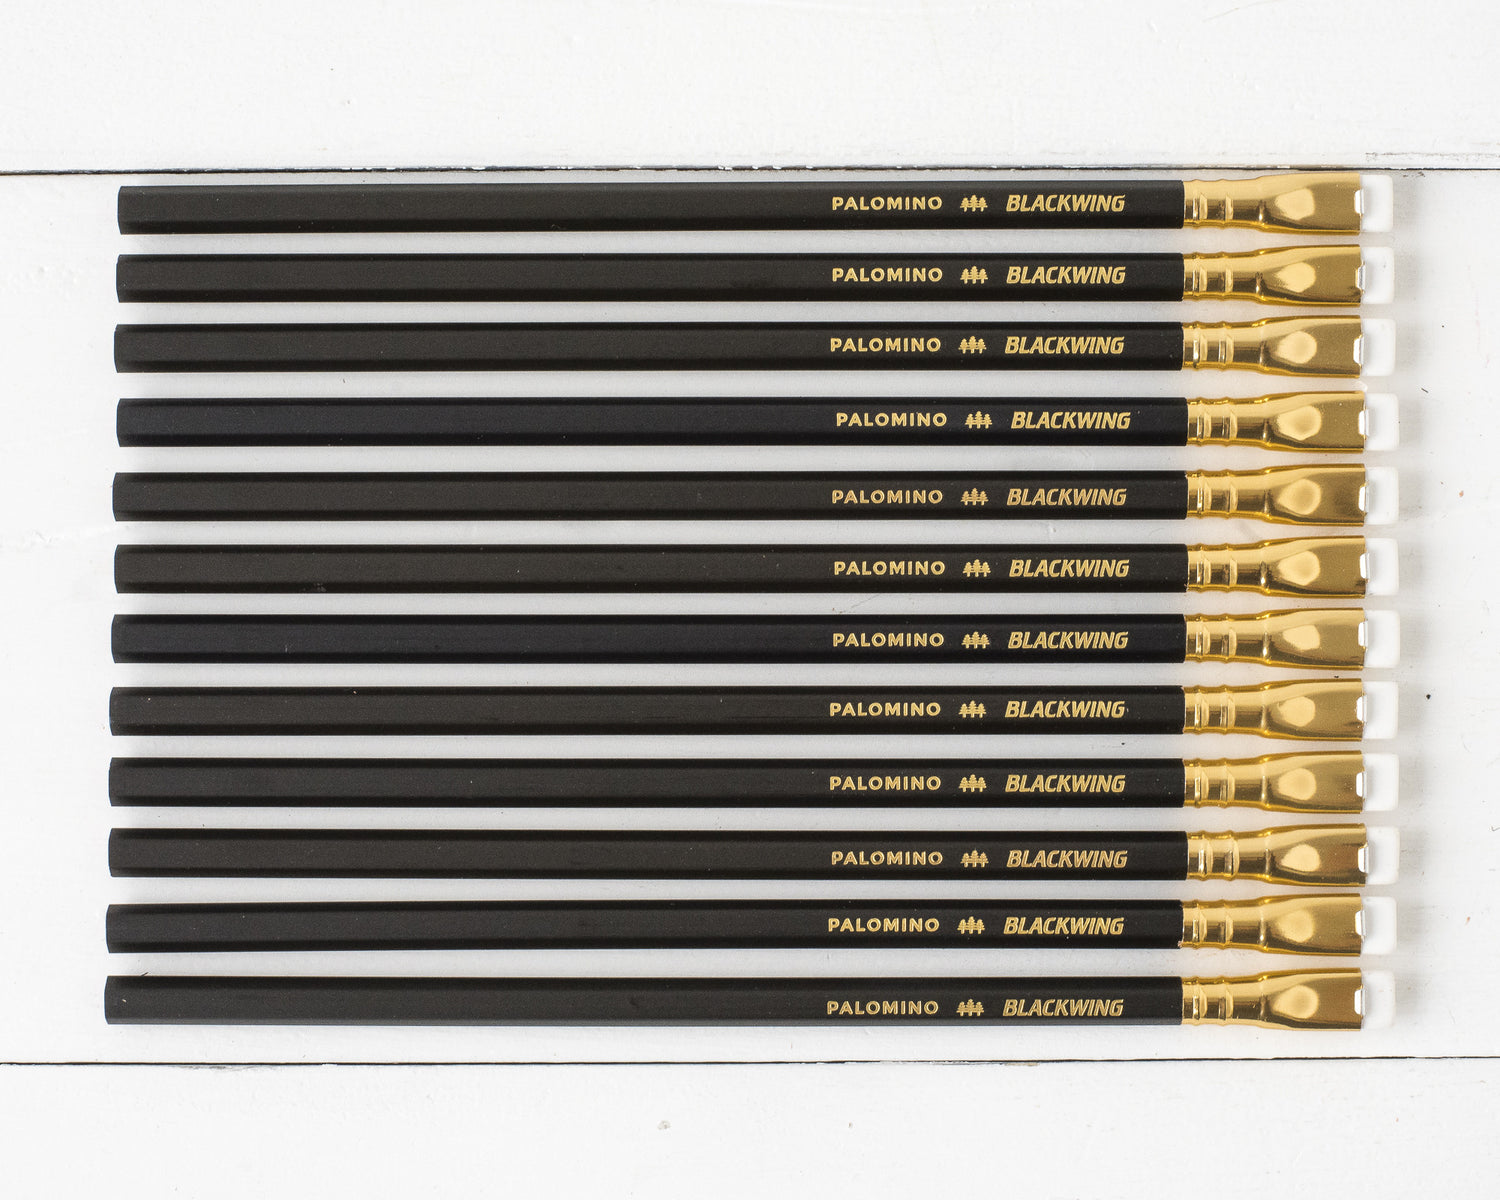 A collection of Blackwing Matte Pencil Set of 12 pencils arranged in parallel on a white surface.